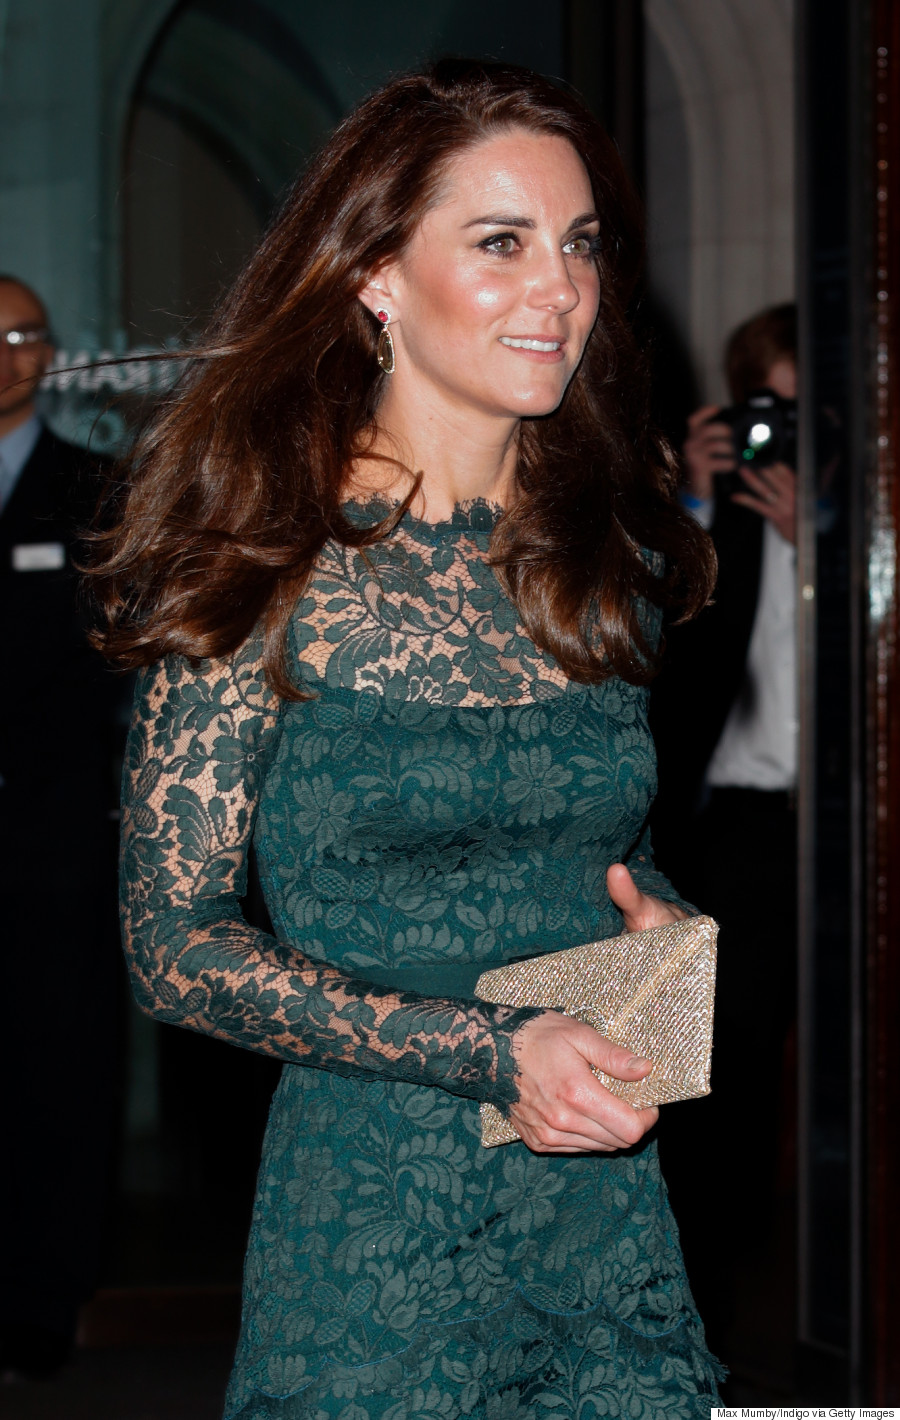 Kate Middleton Nails The Princess Look In Green Lace Dress